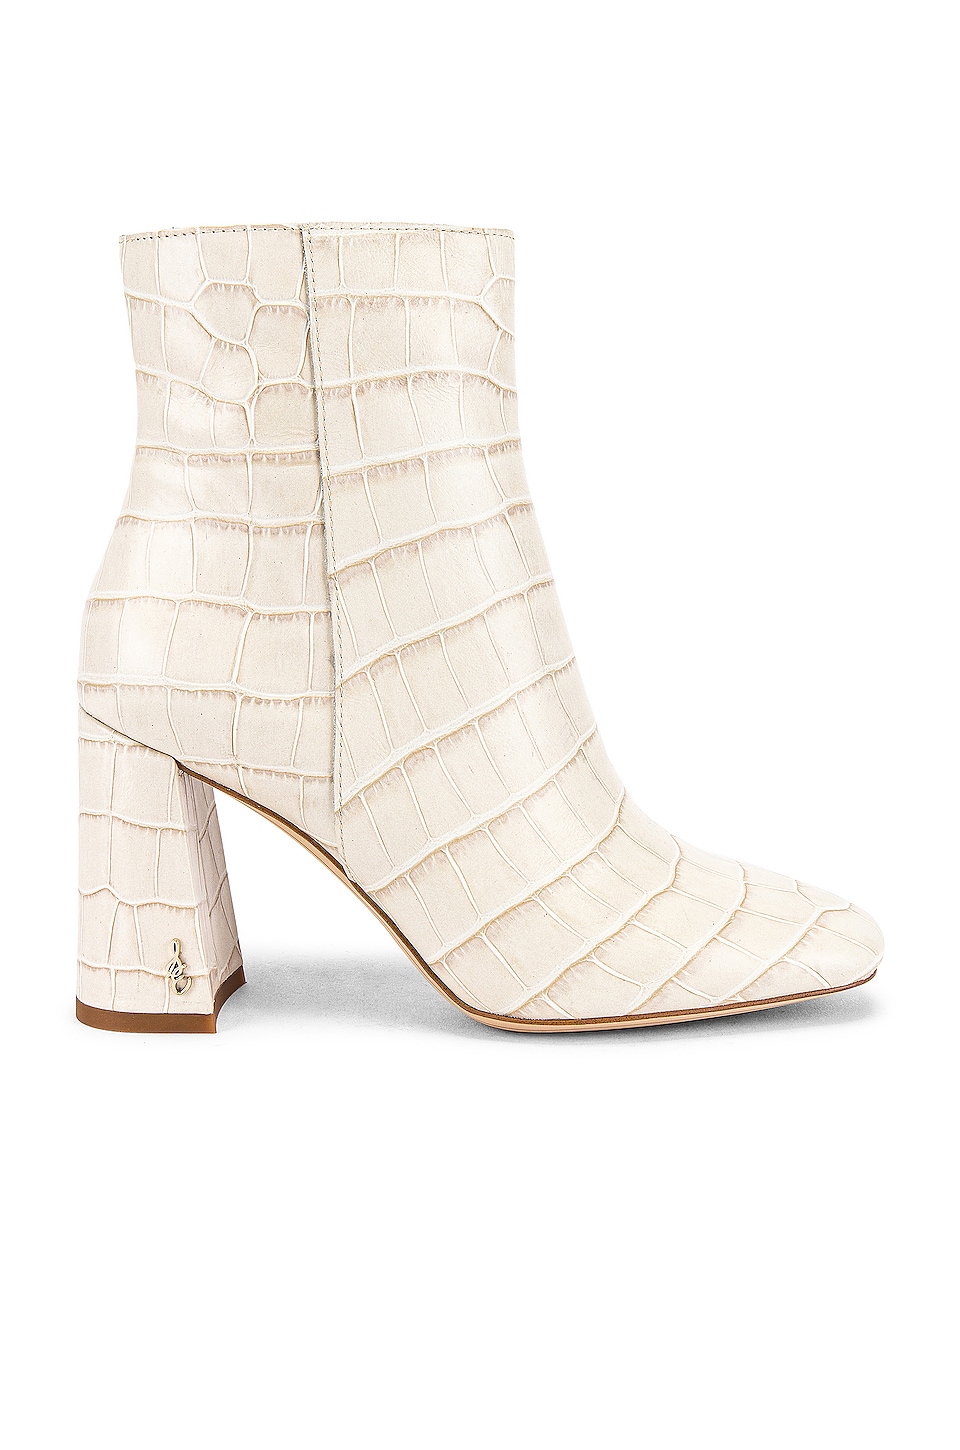 Image 1 of Codie 2 Bootie in Modern Ivory